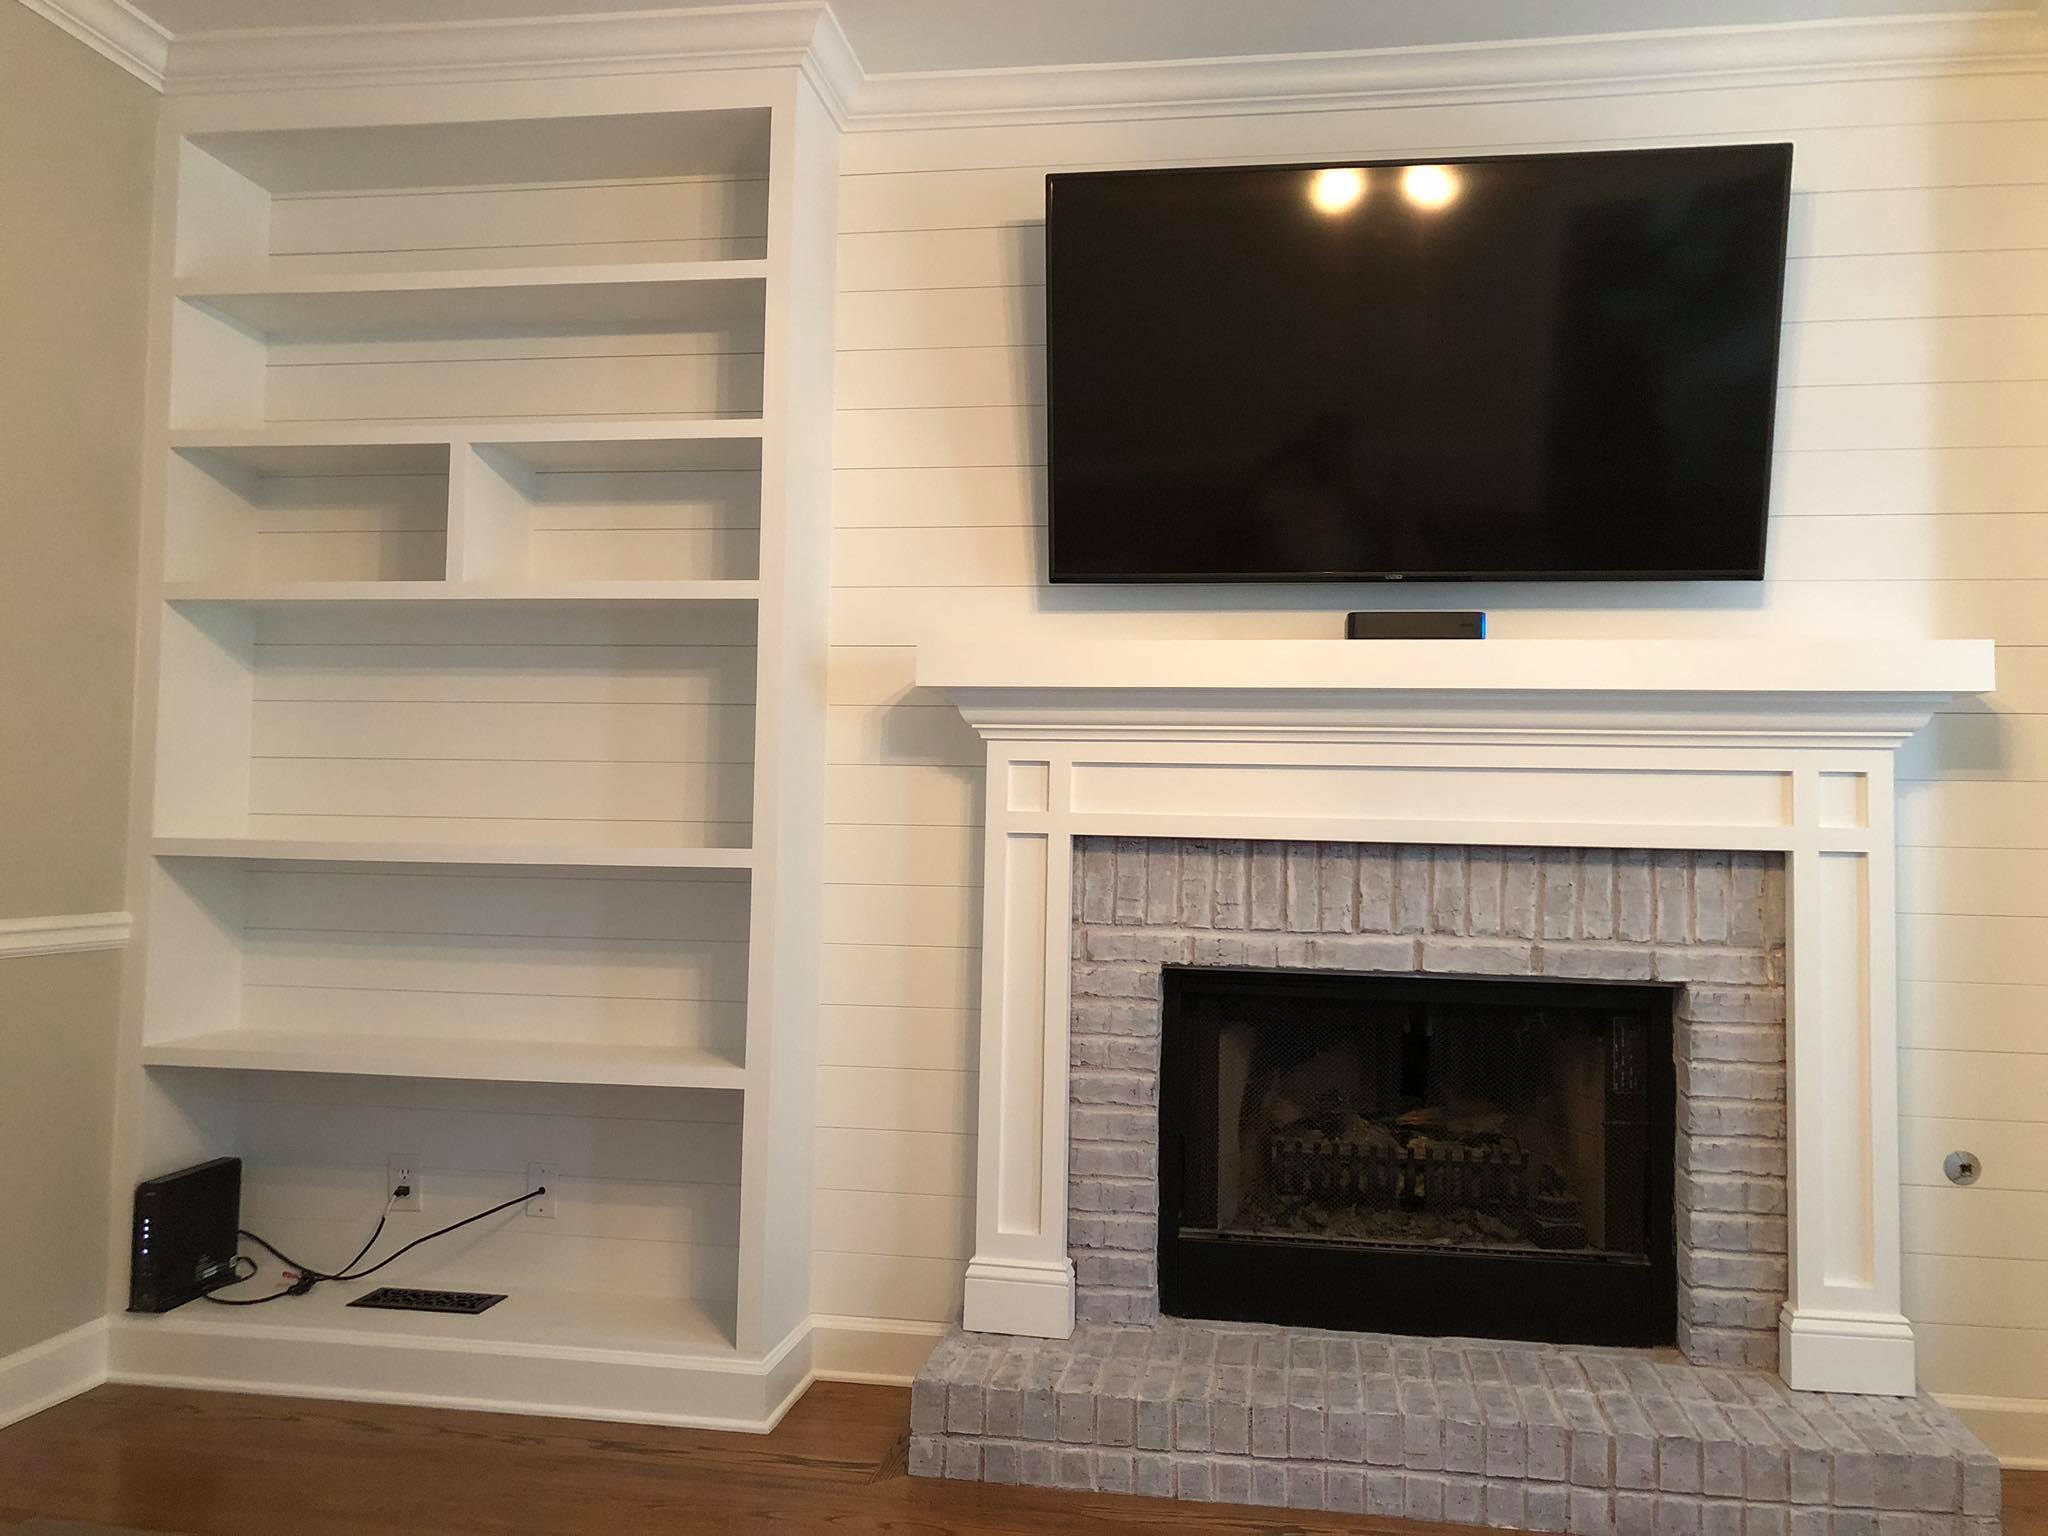 Fireplace Custom Wall High Built in Cabinets Shelves and Trim Painted White